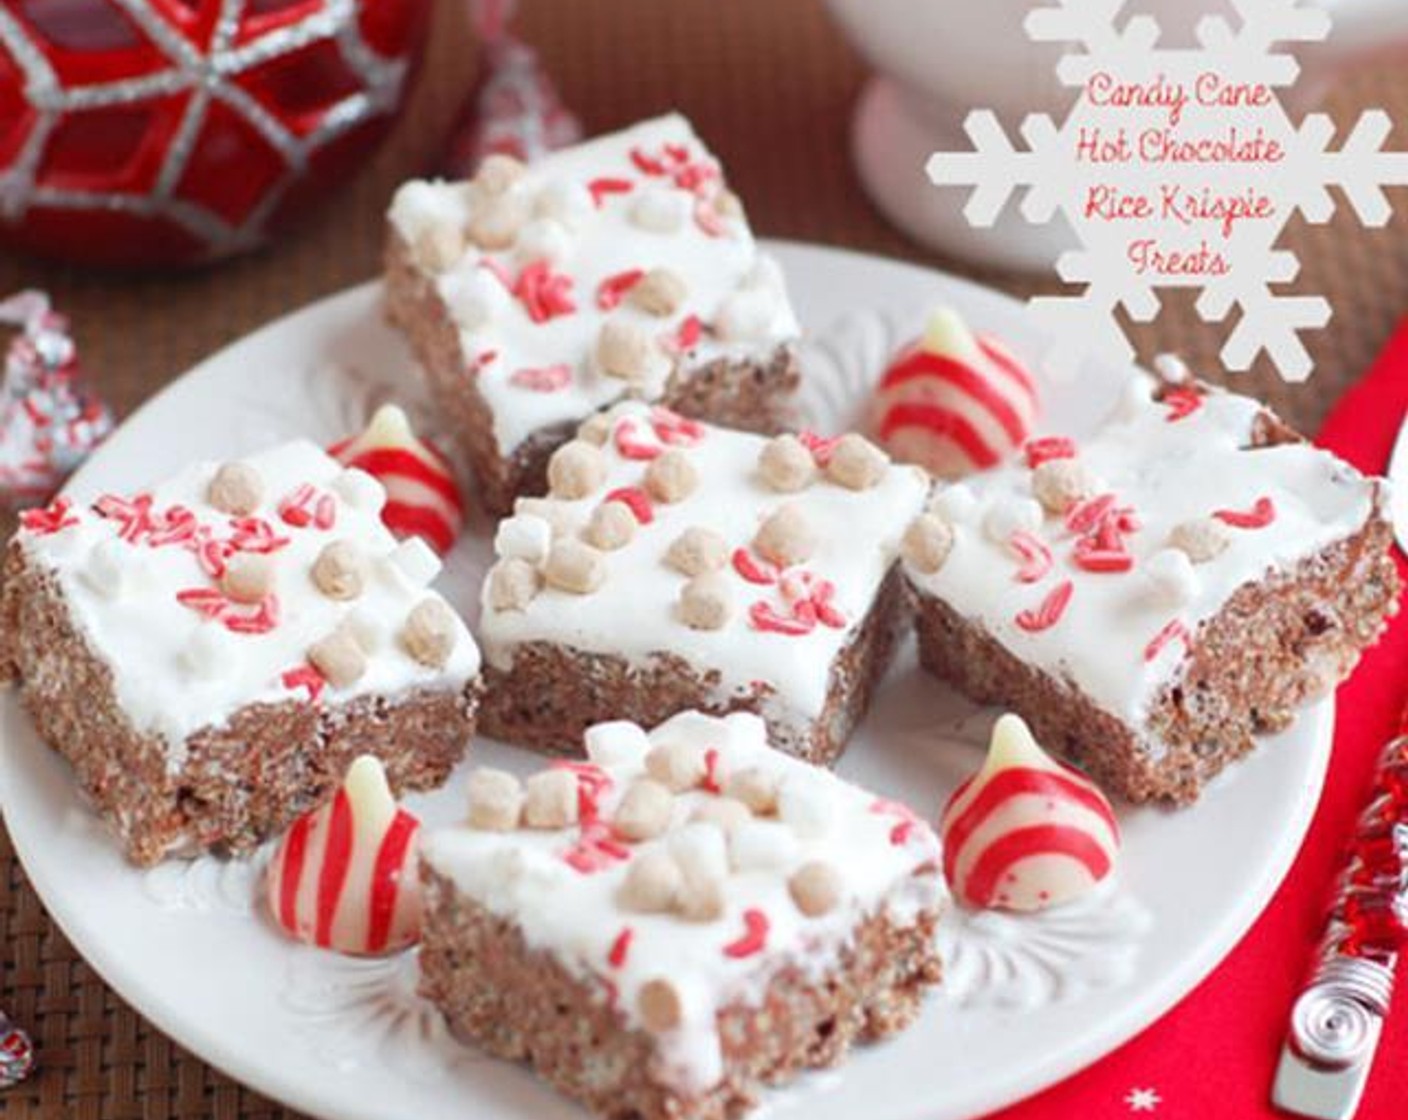 Candy Cane Hot Chocolate Rice Krispies